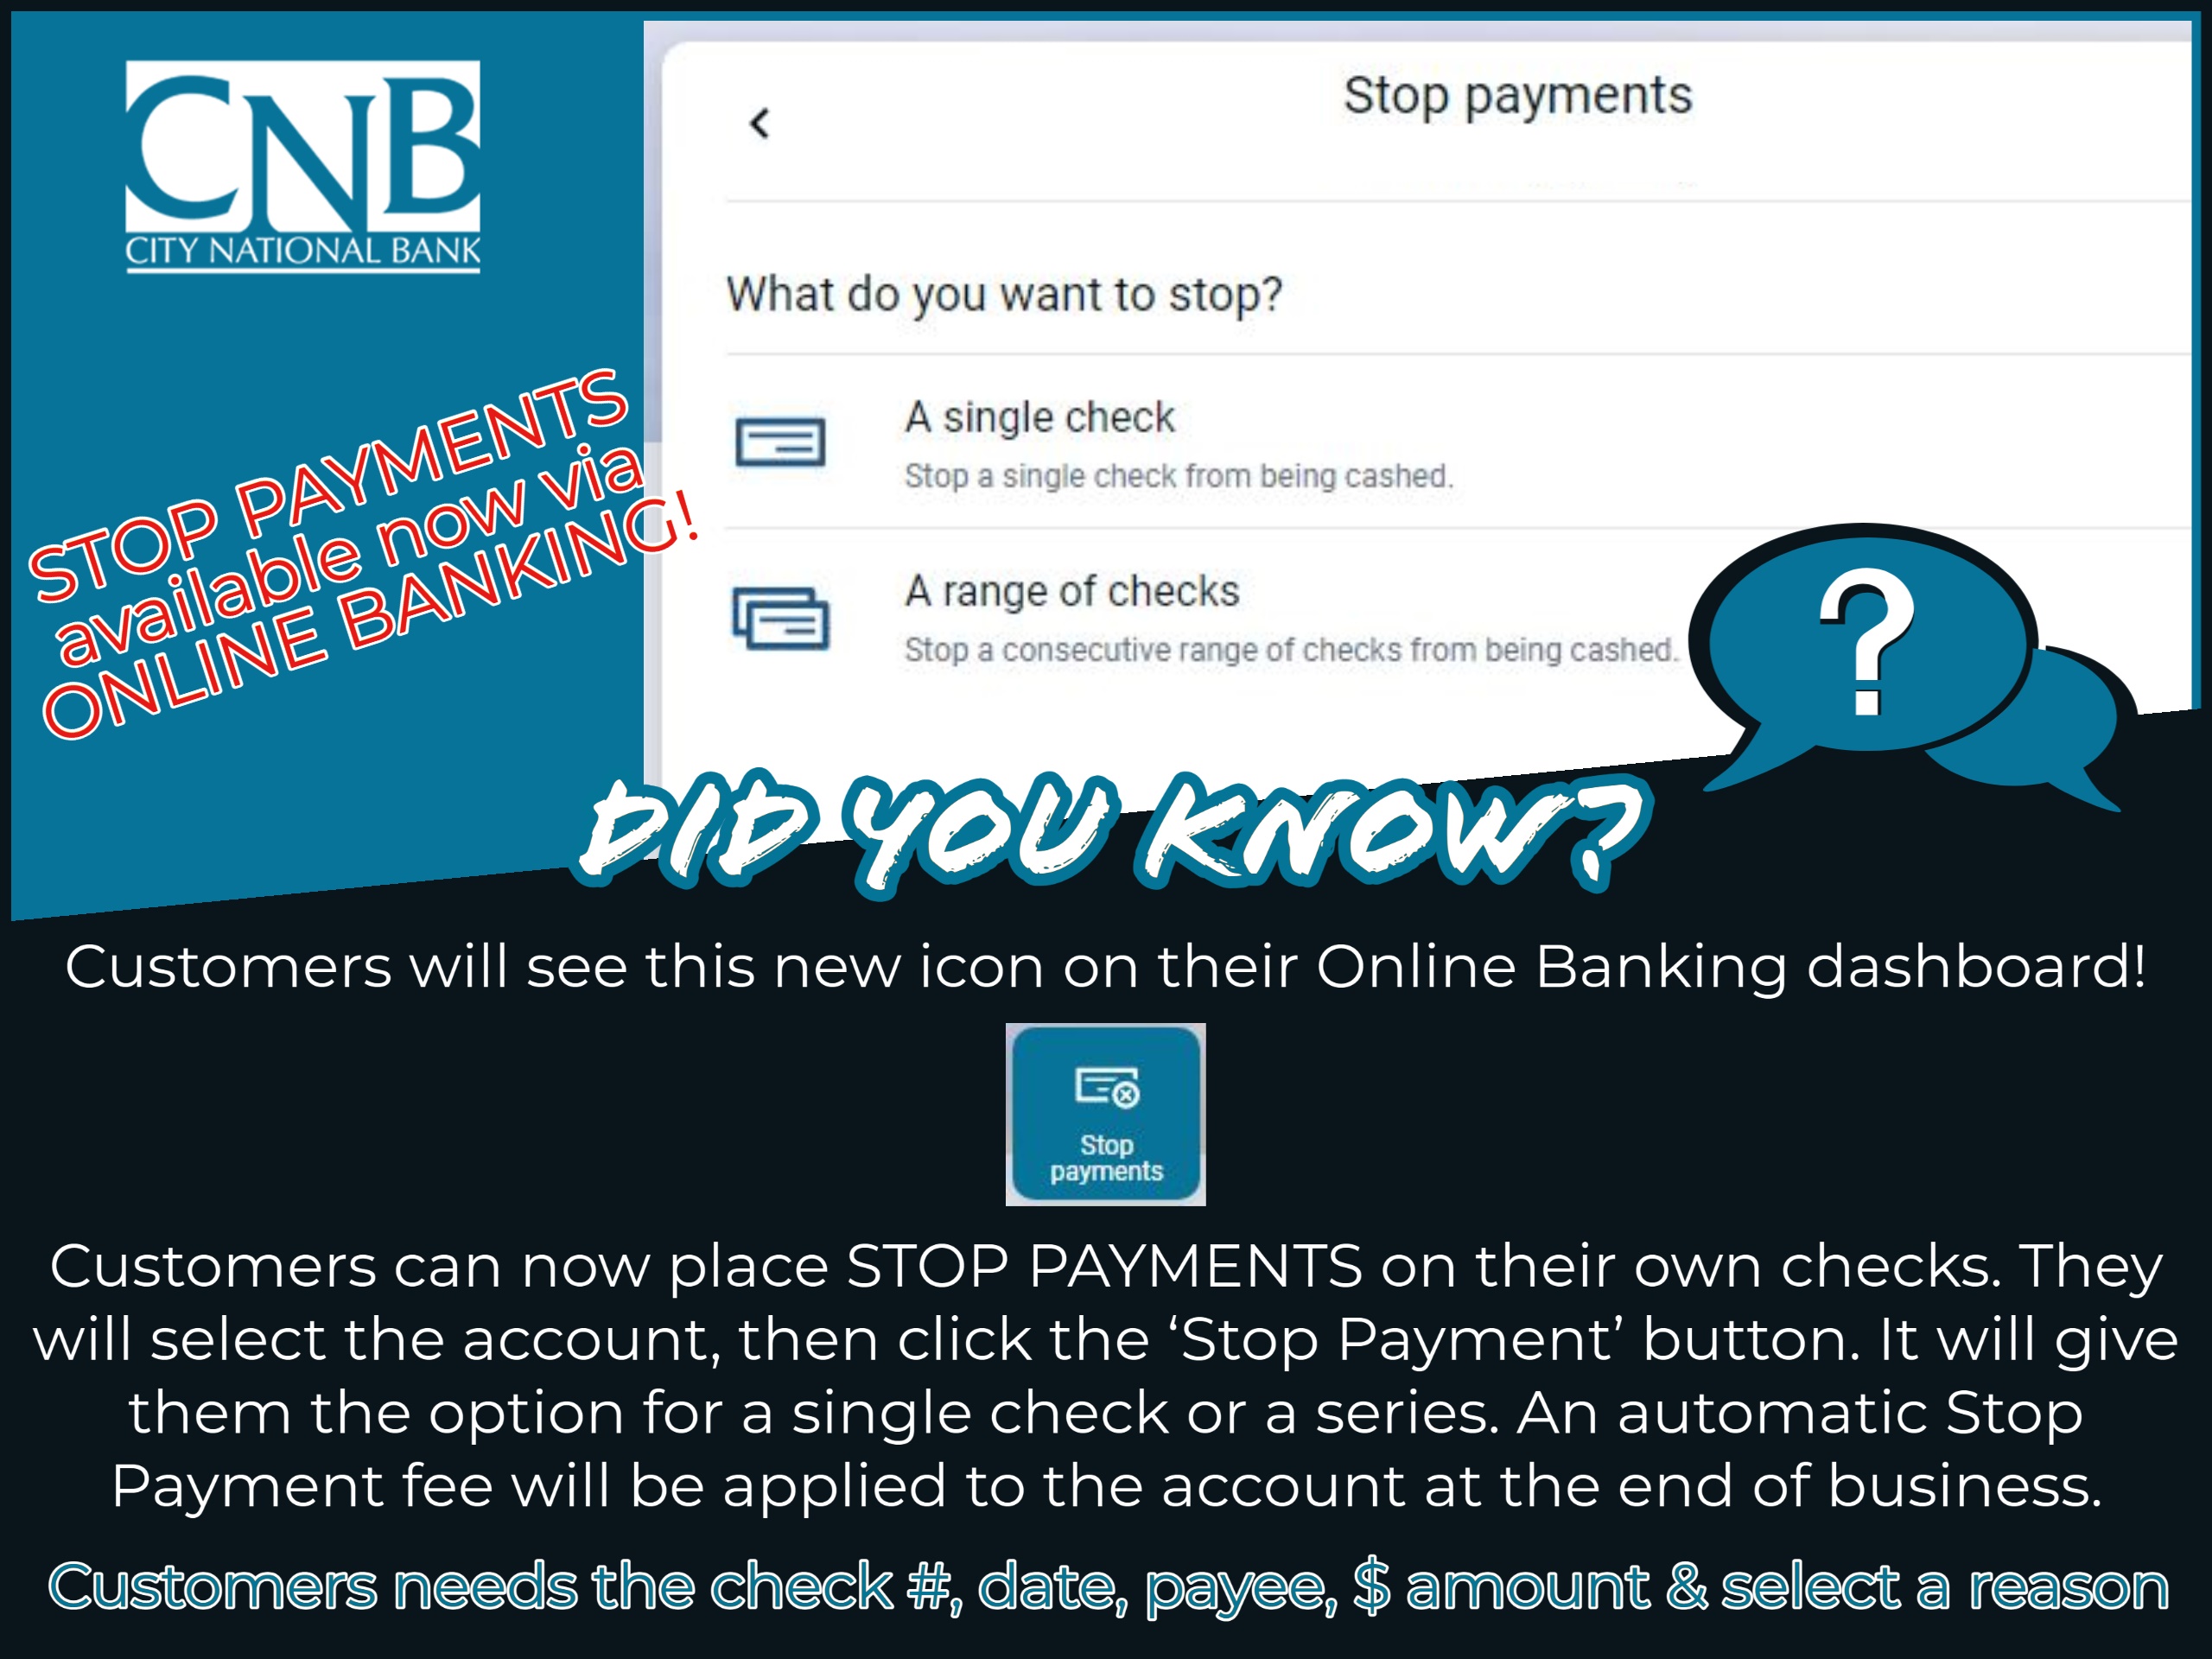 "did you know" graphic explaining stop payments being available online